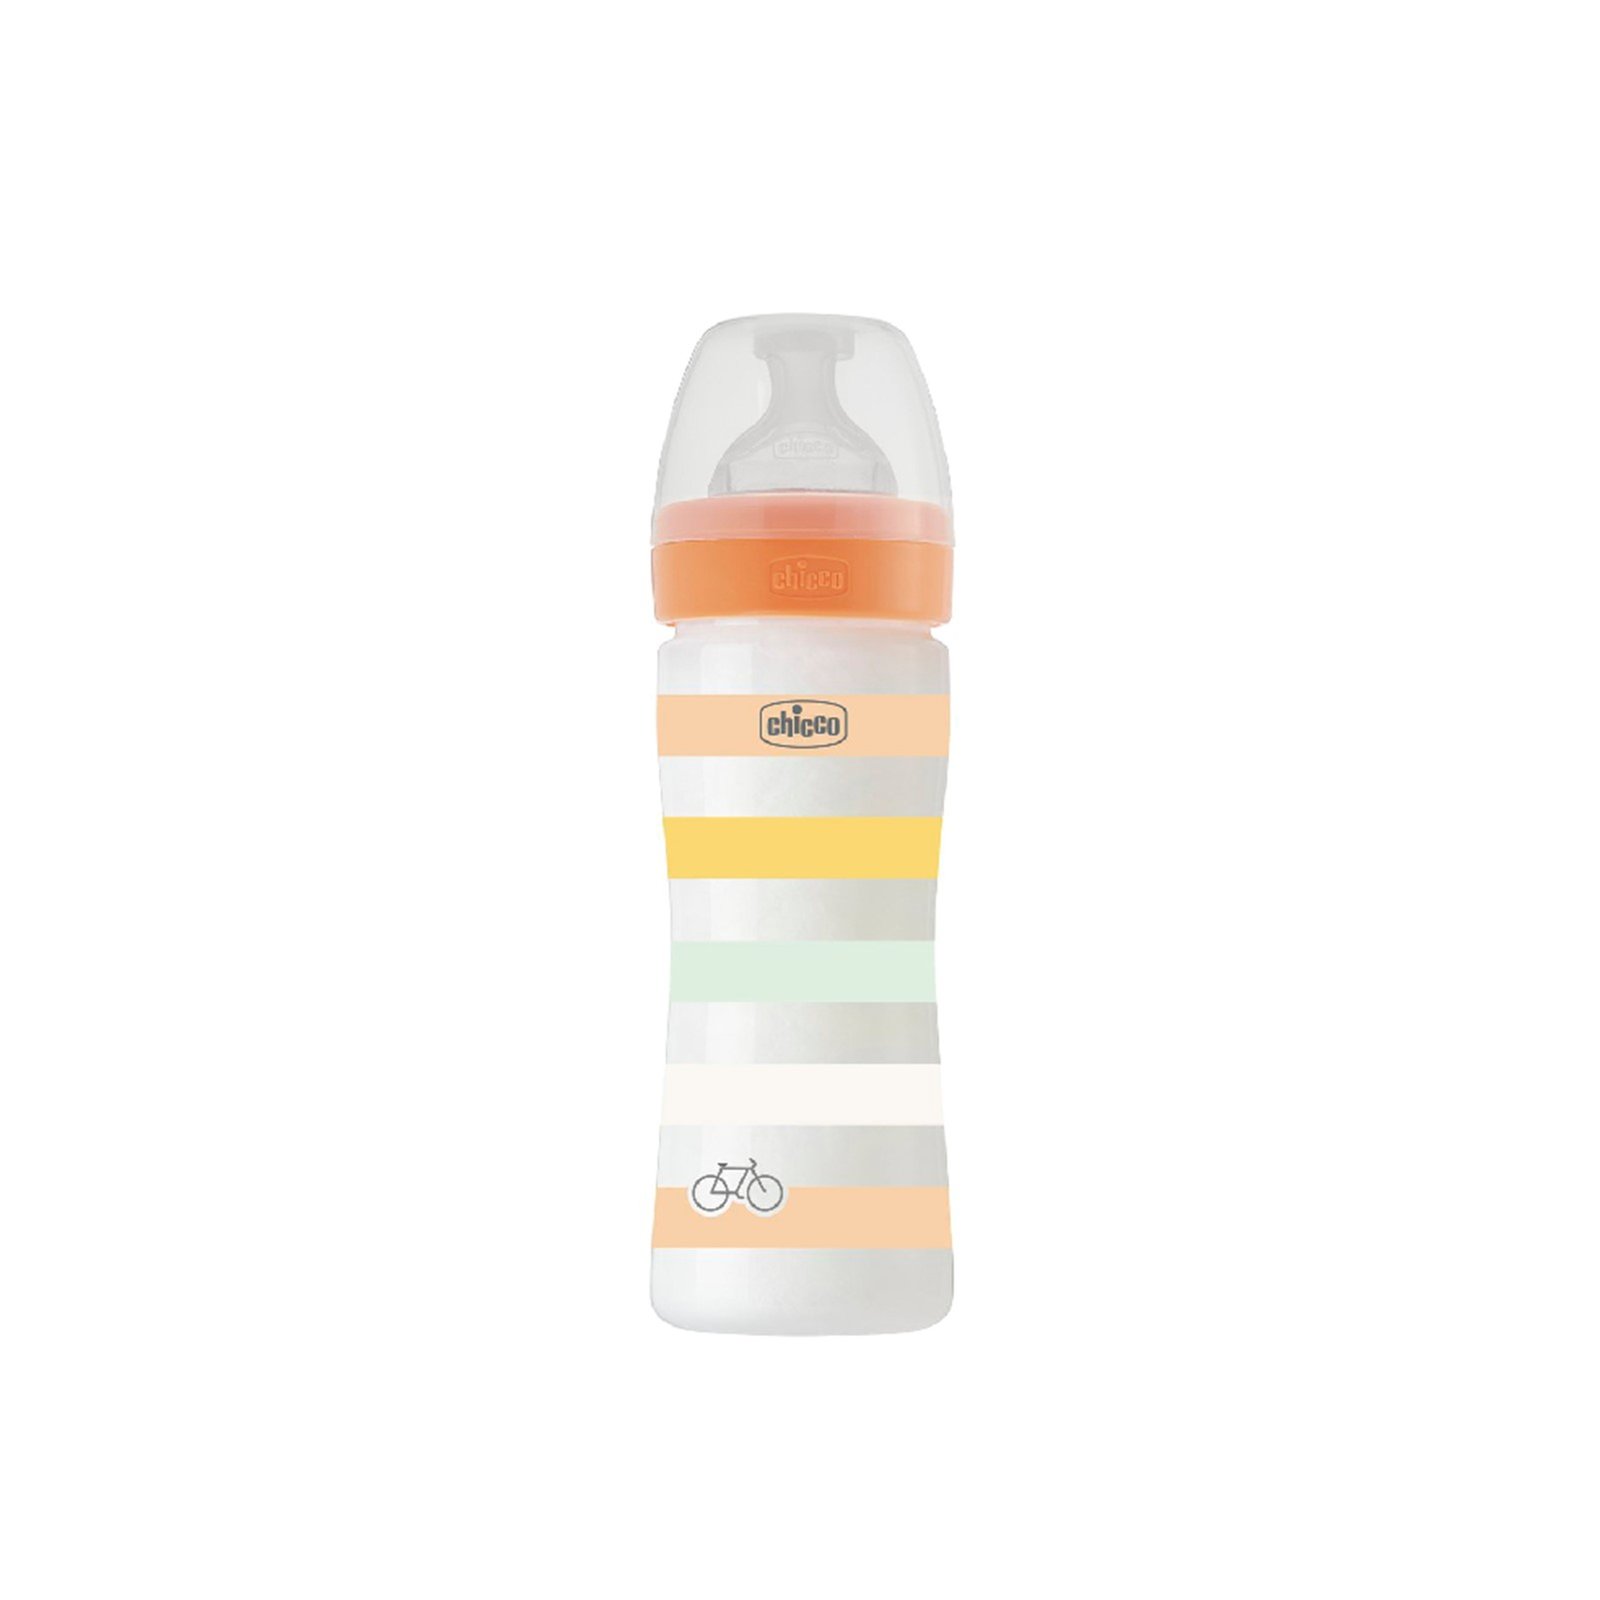 Chicco Well-Being Colors Bottle 2m+ Orange 250ml (9 fl oz)